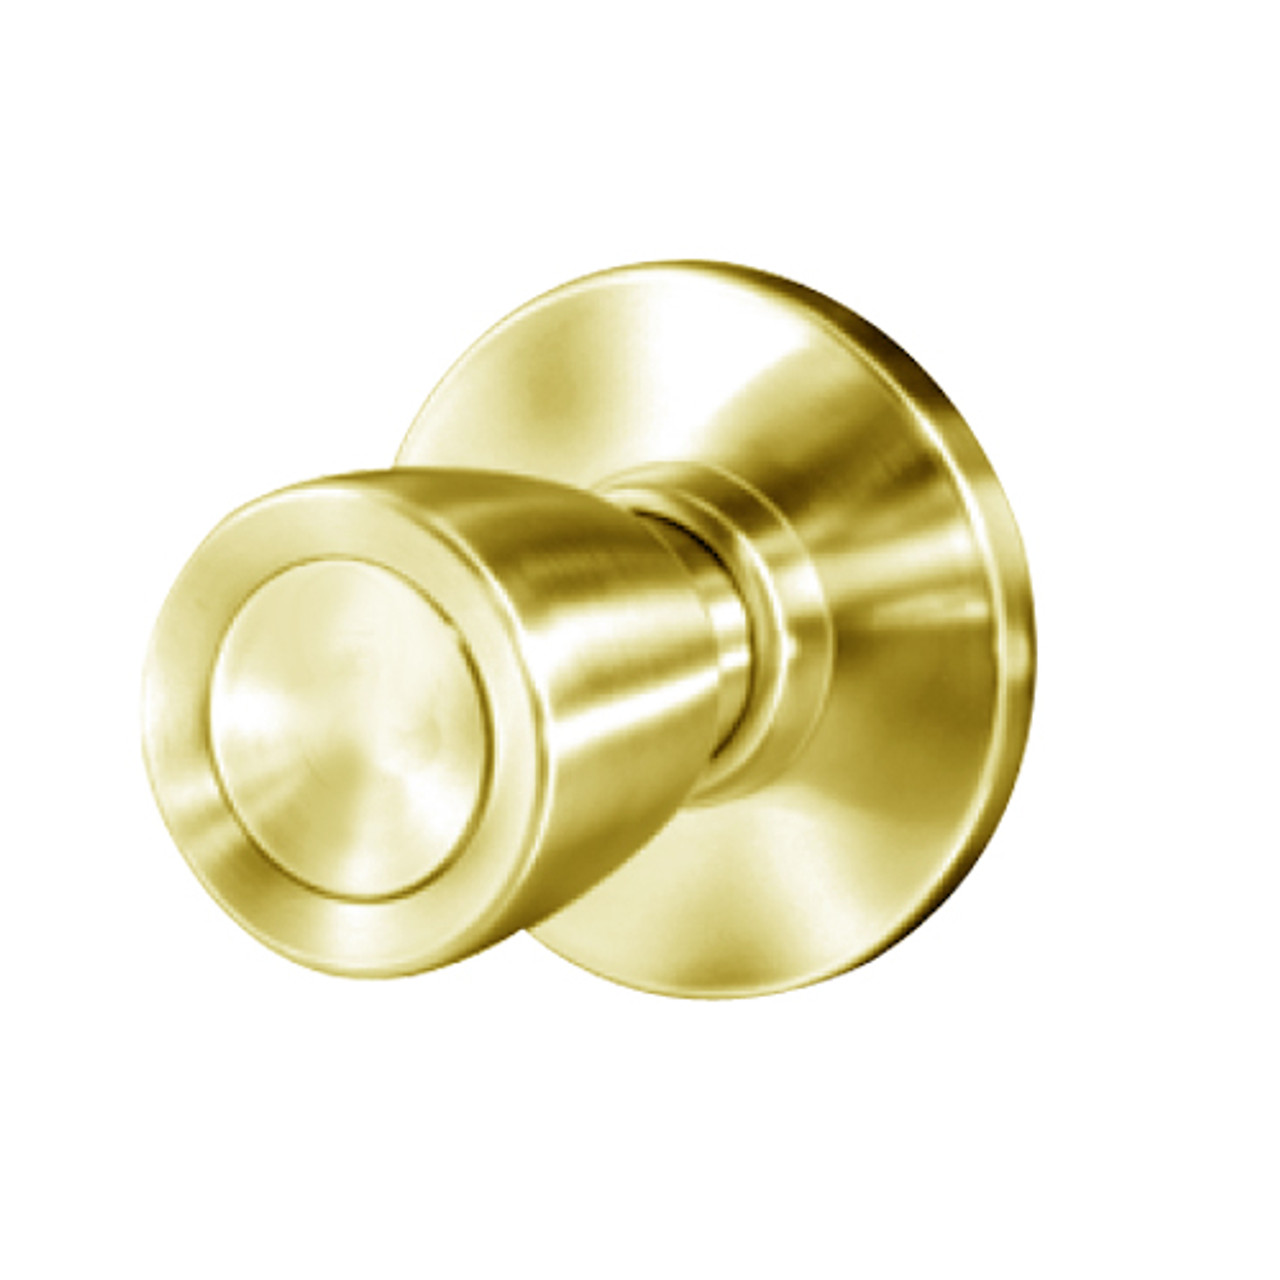 8K30NX6AS3605 Best 8K Series Exit Heavy Duty Cylindrical Knob Locks with Tulip Style in Bright Brass